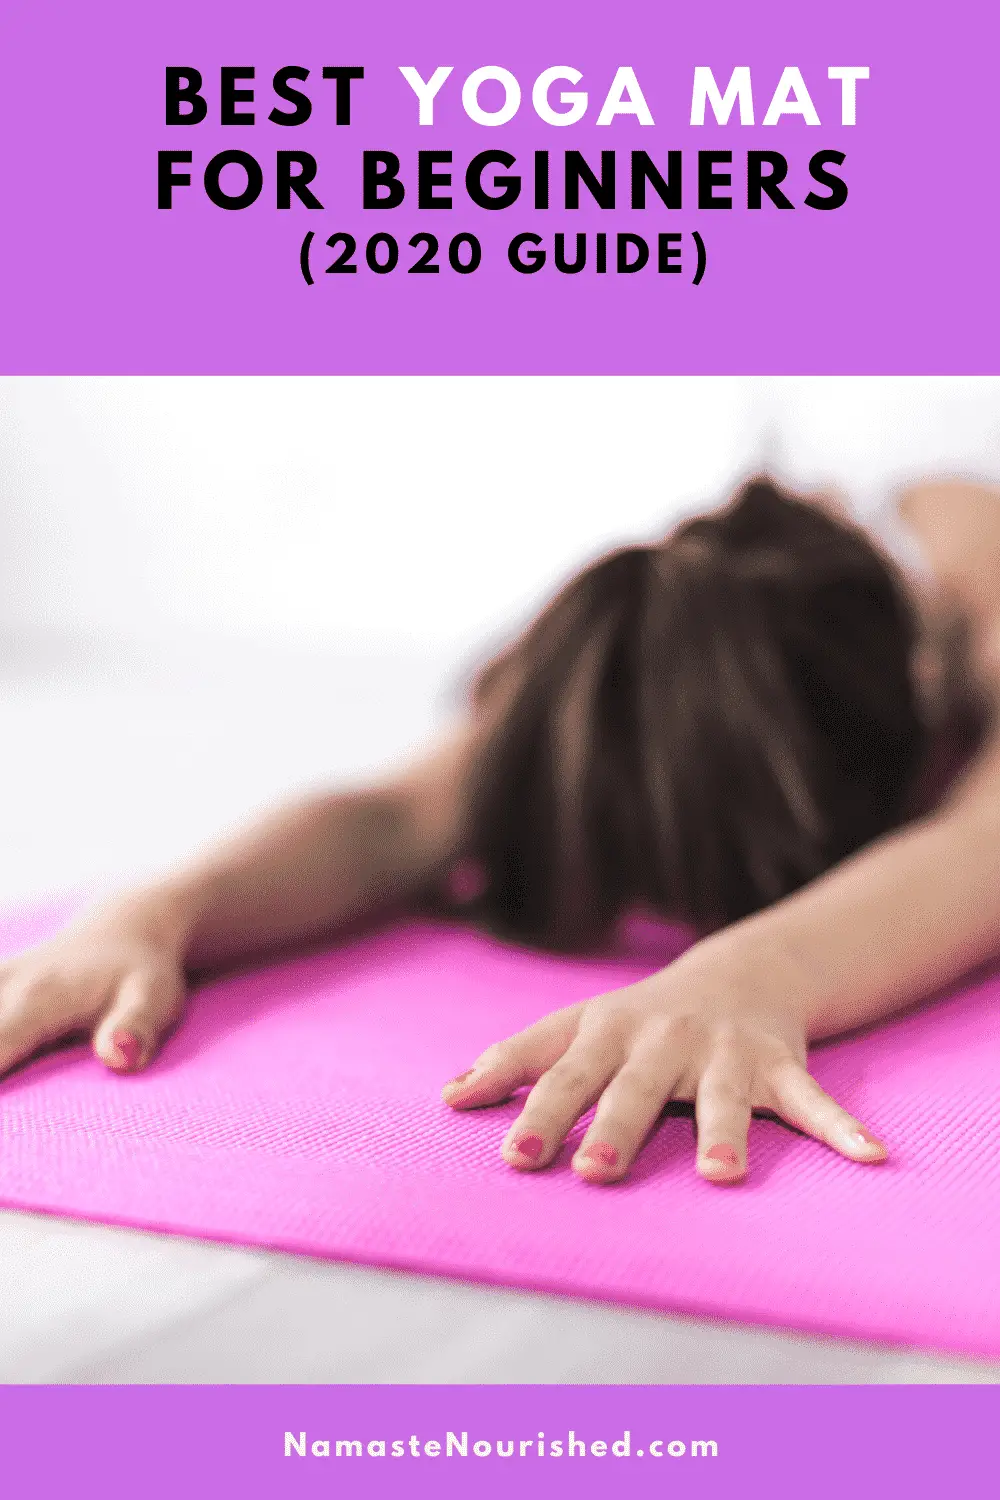 2022 Guide - Best Yoga Mat For Beginners - Namaste Nourished